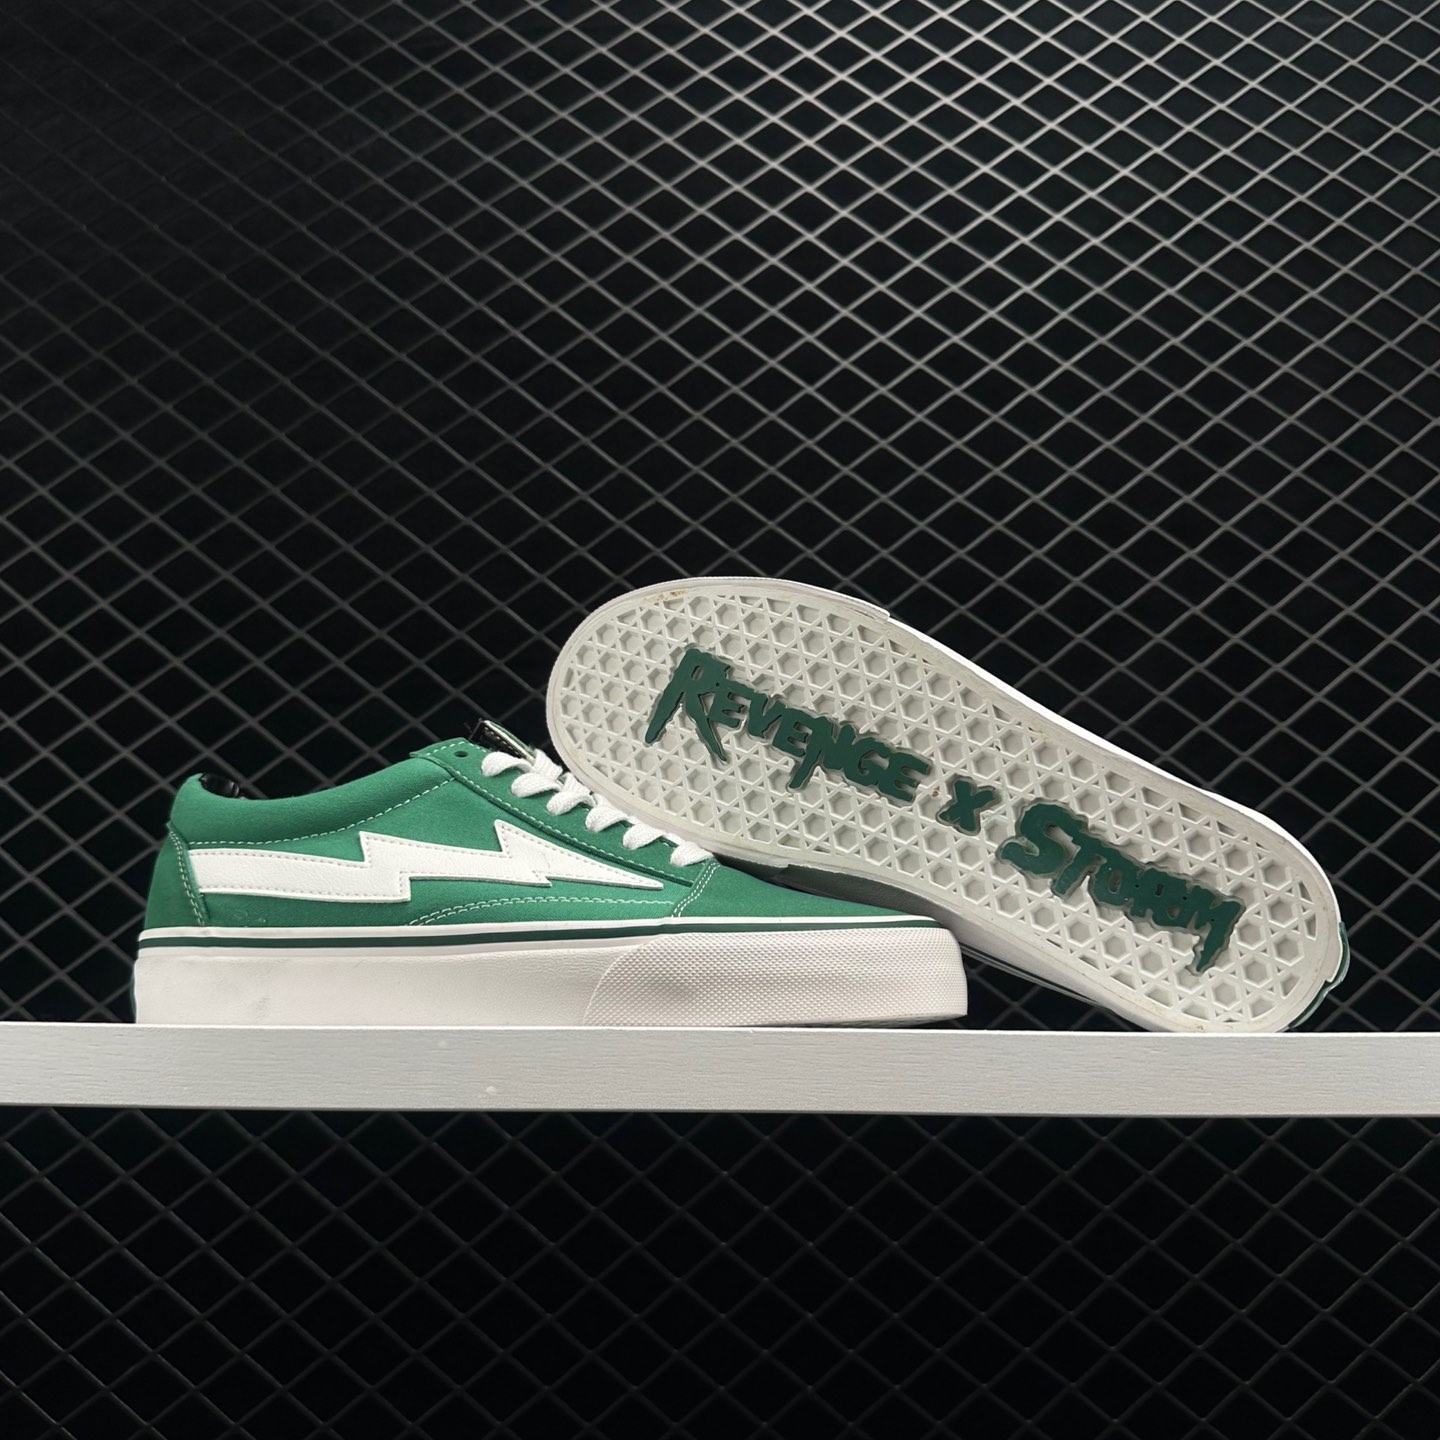 Revenge x Storm Low Top Green - Trendy Sneakers for Style Enthusiasts